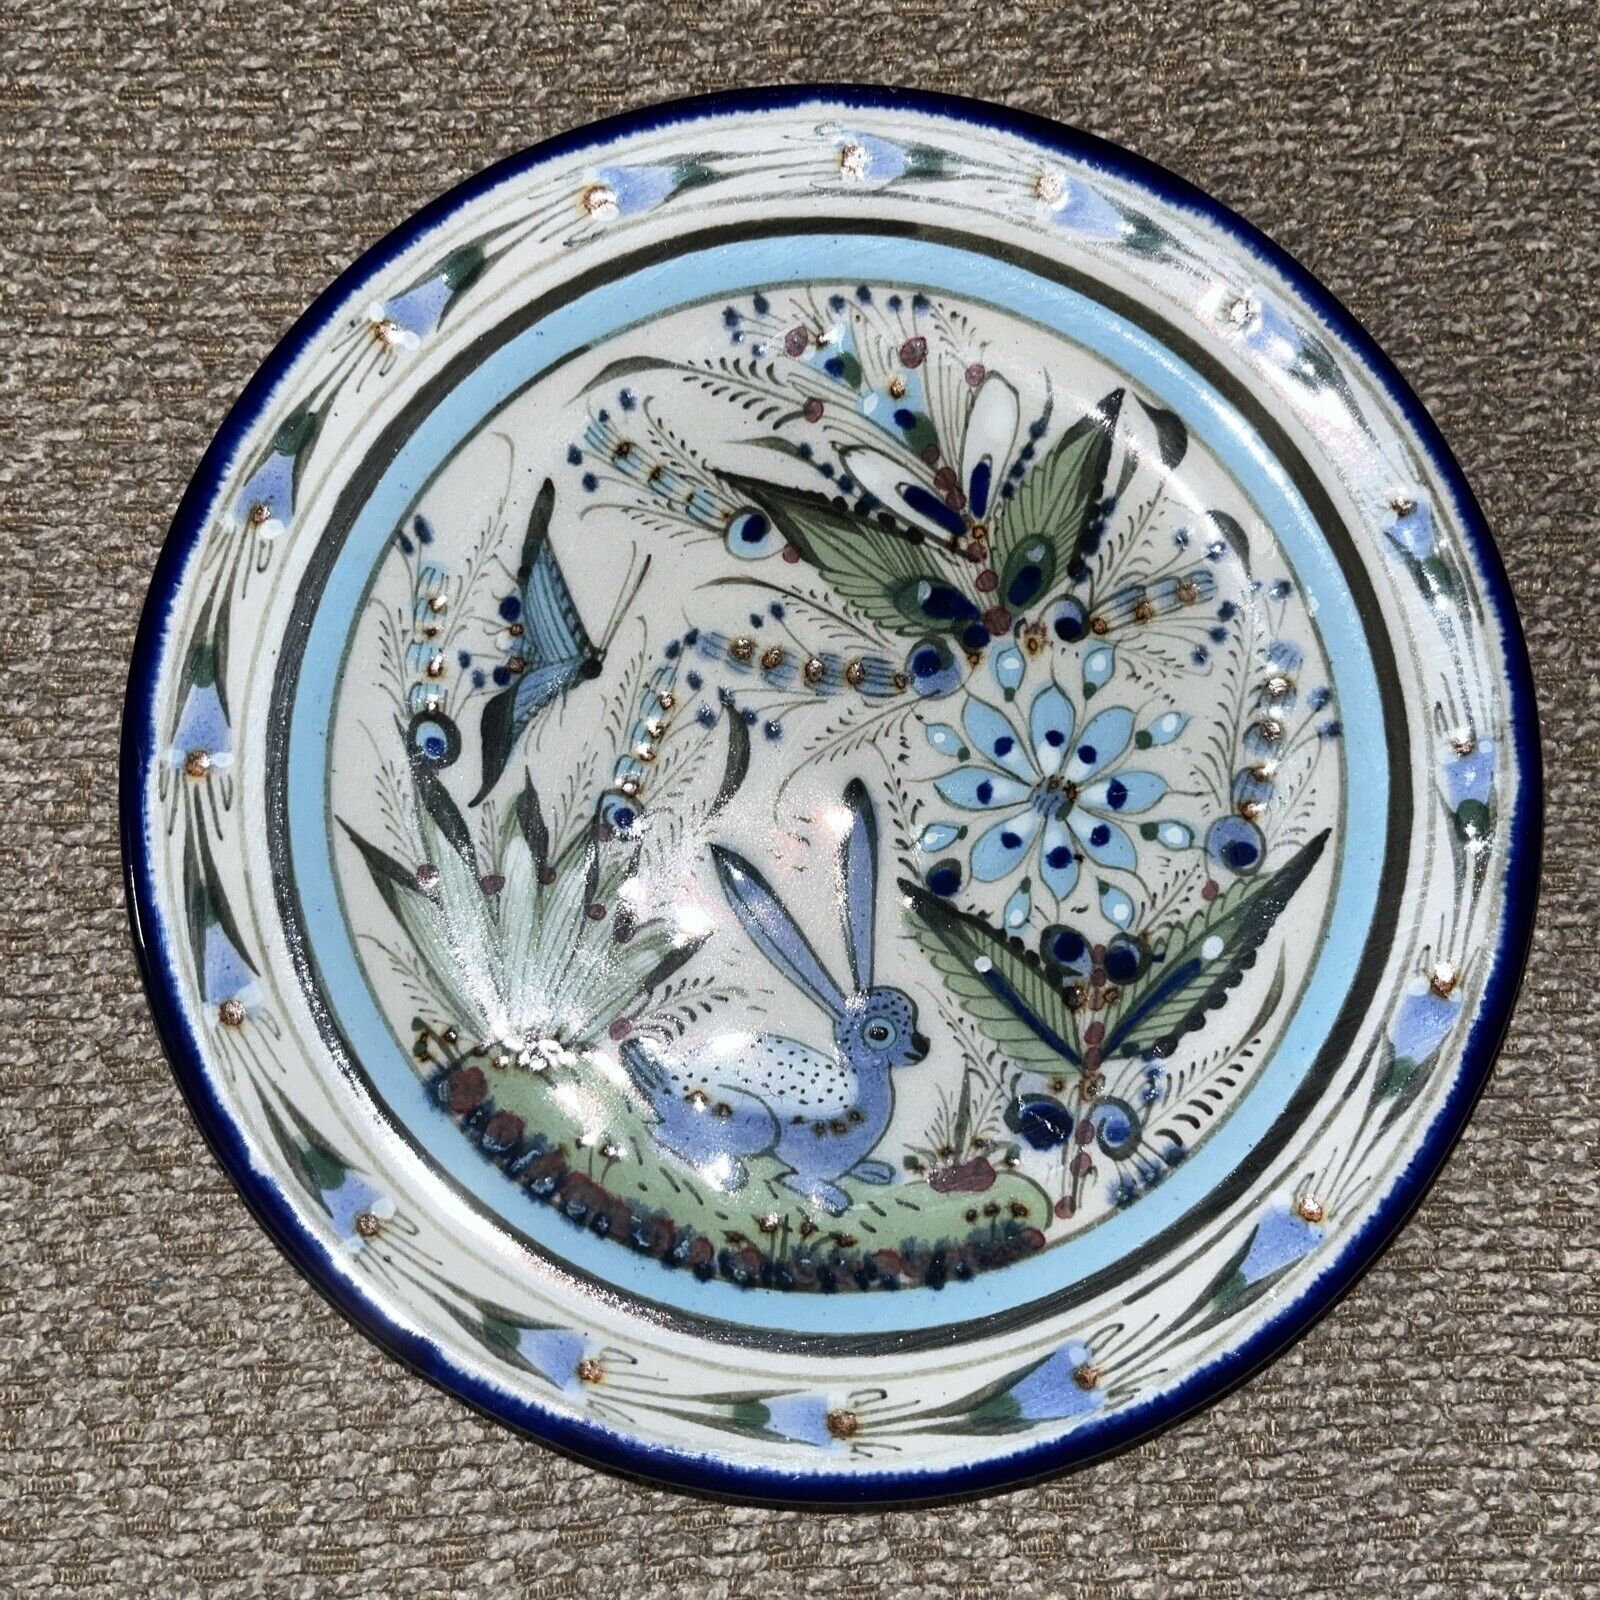 Ken Edwards Collection 7 Inch Sale Plate 